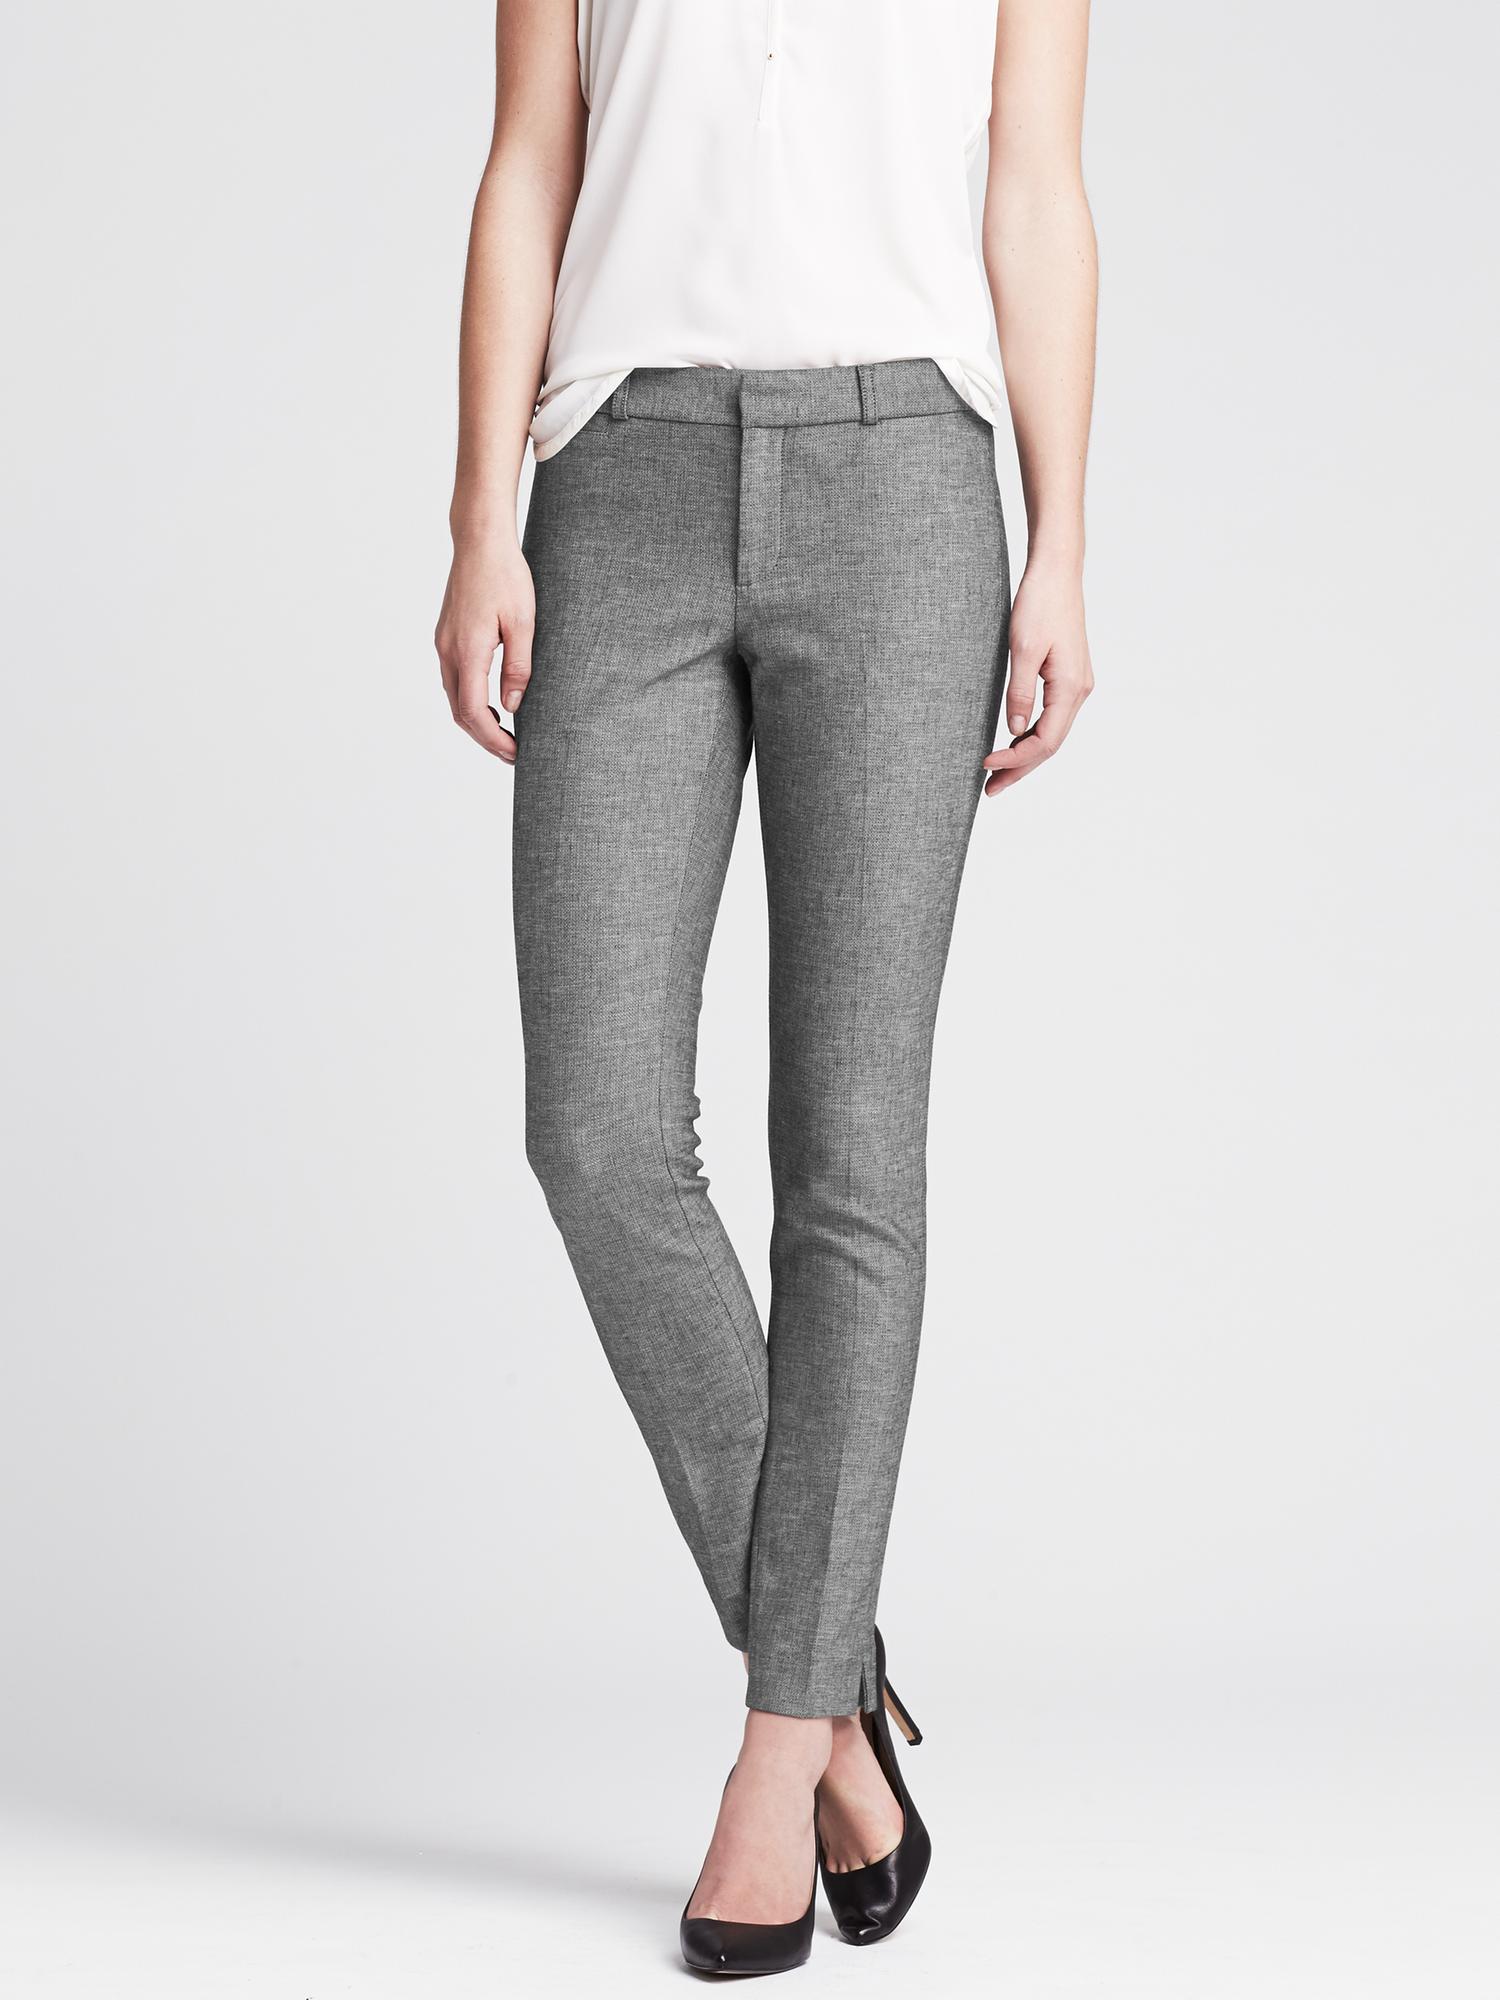 Sloan Skinny-Fit Charcoal Ankle Pant